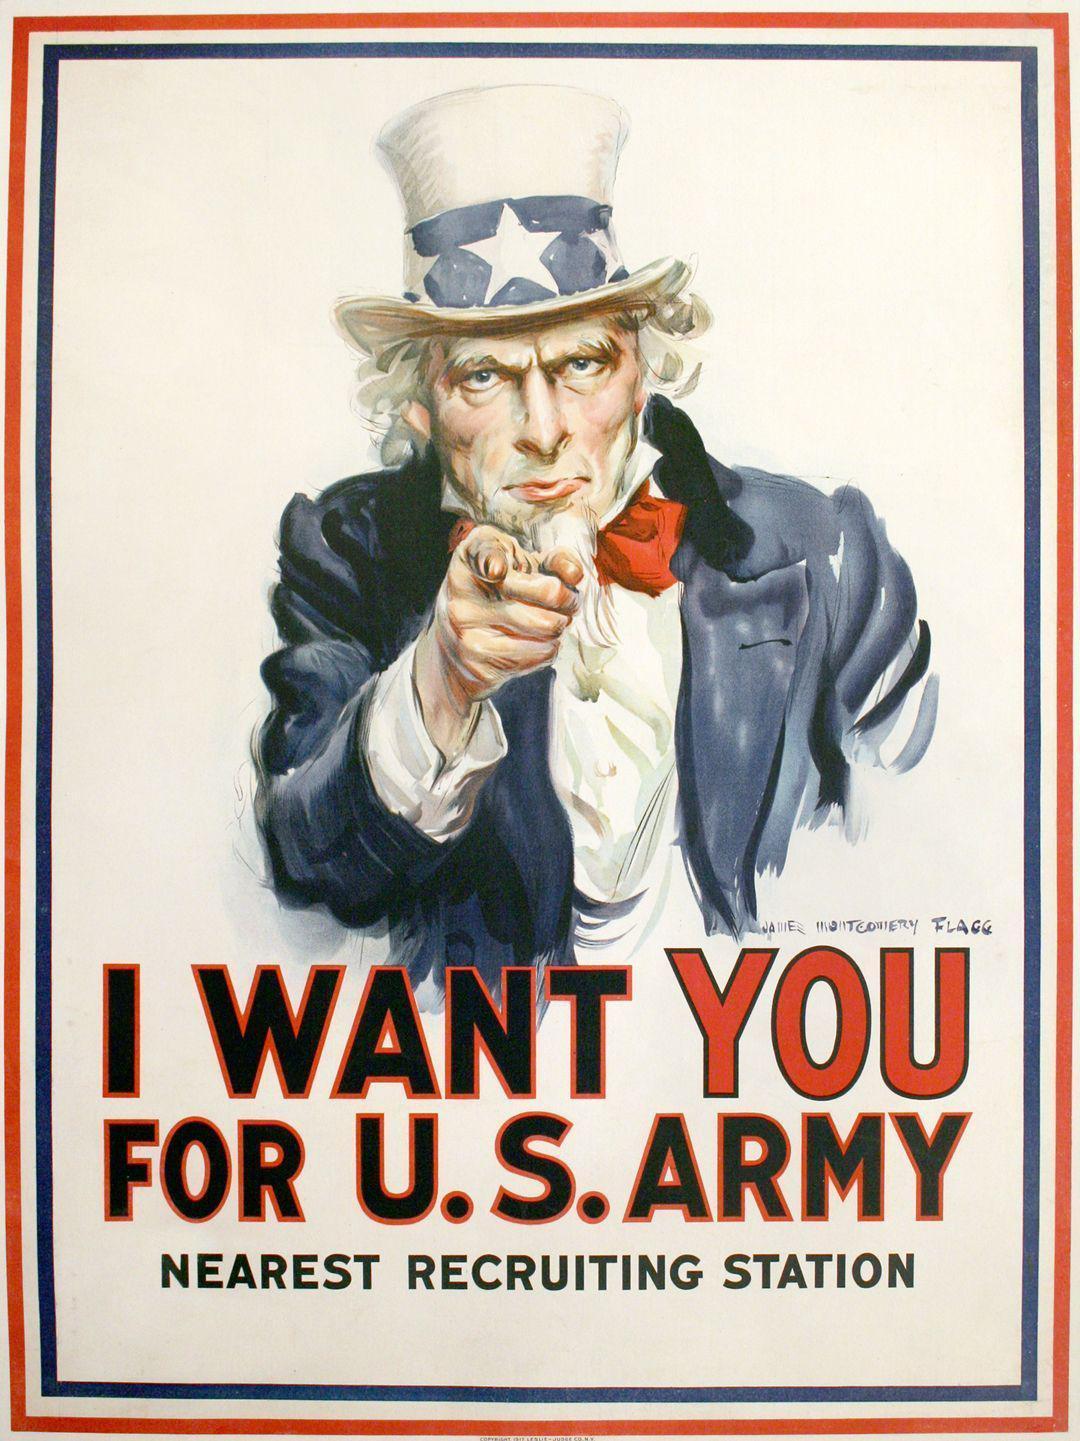 I Want You for U.S. Army Original Poster 1917 by James Montgomery Flagg